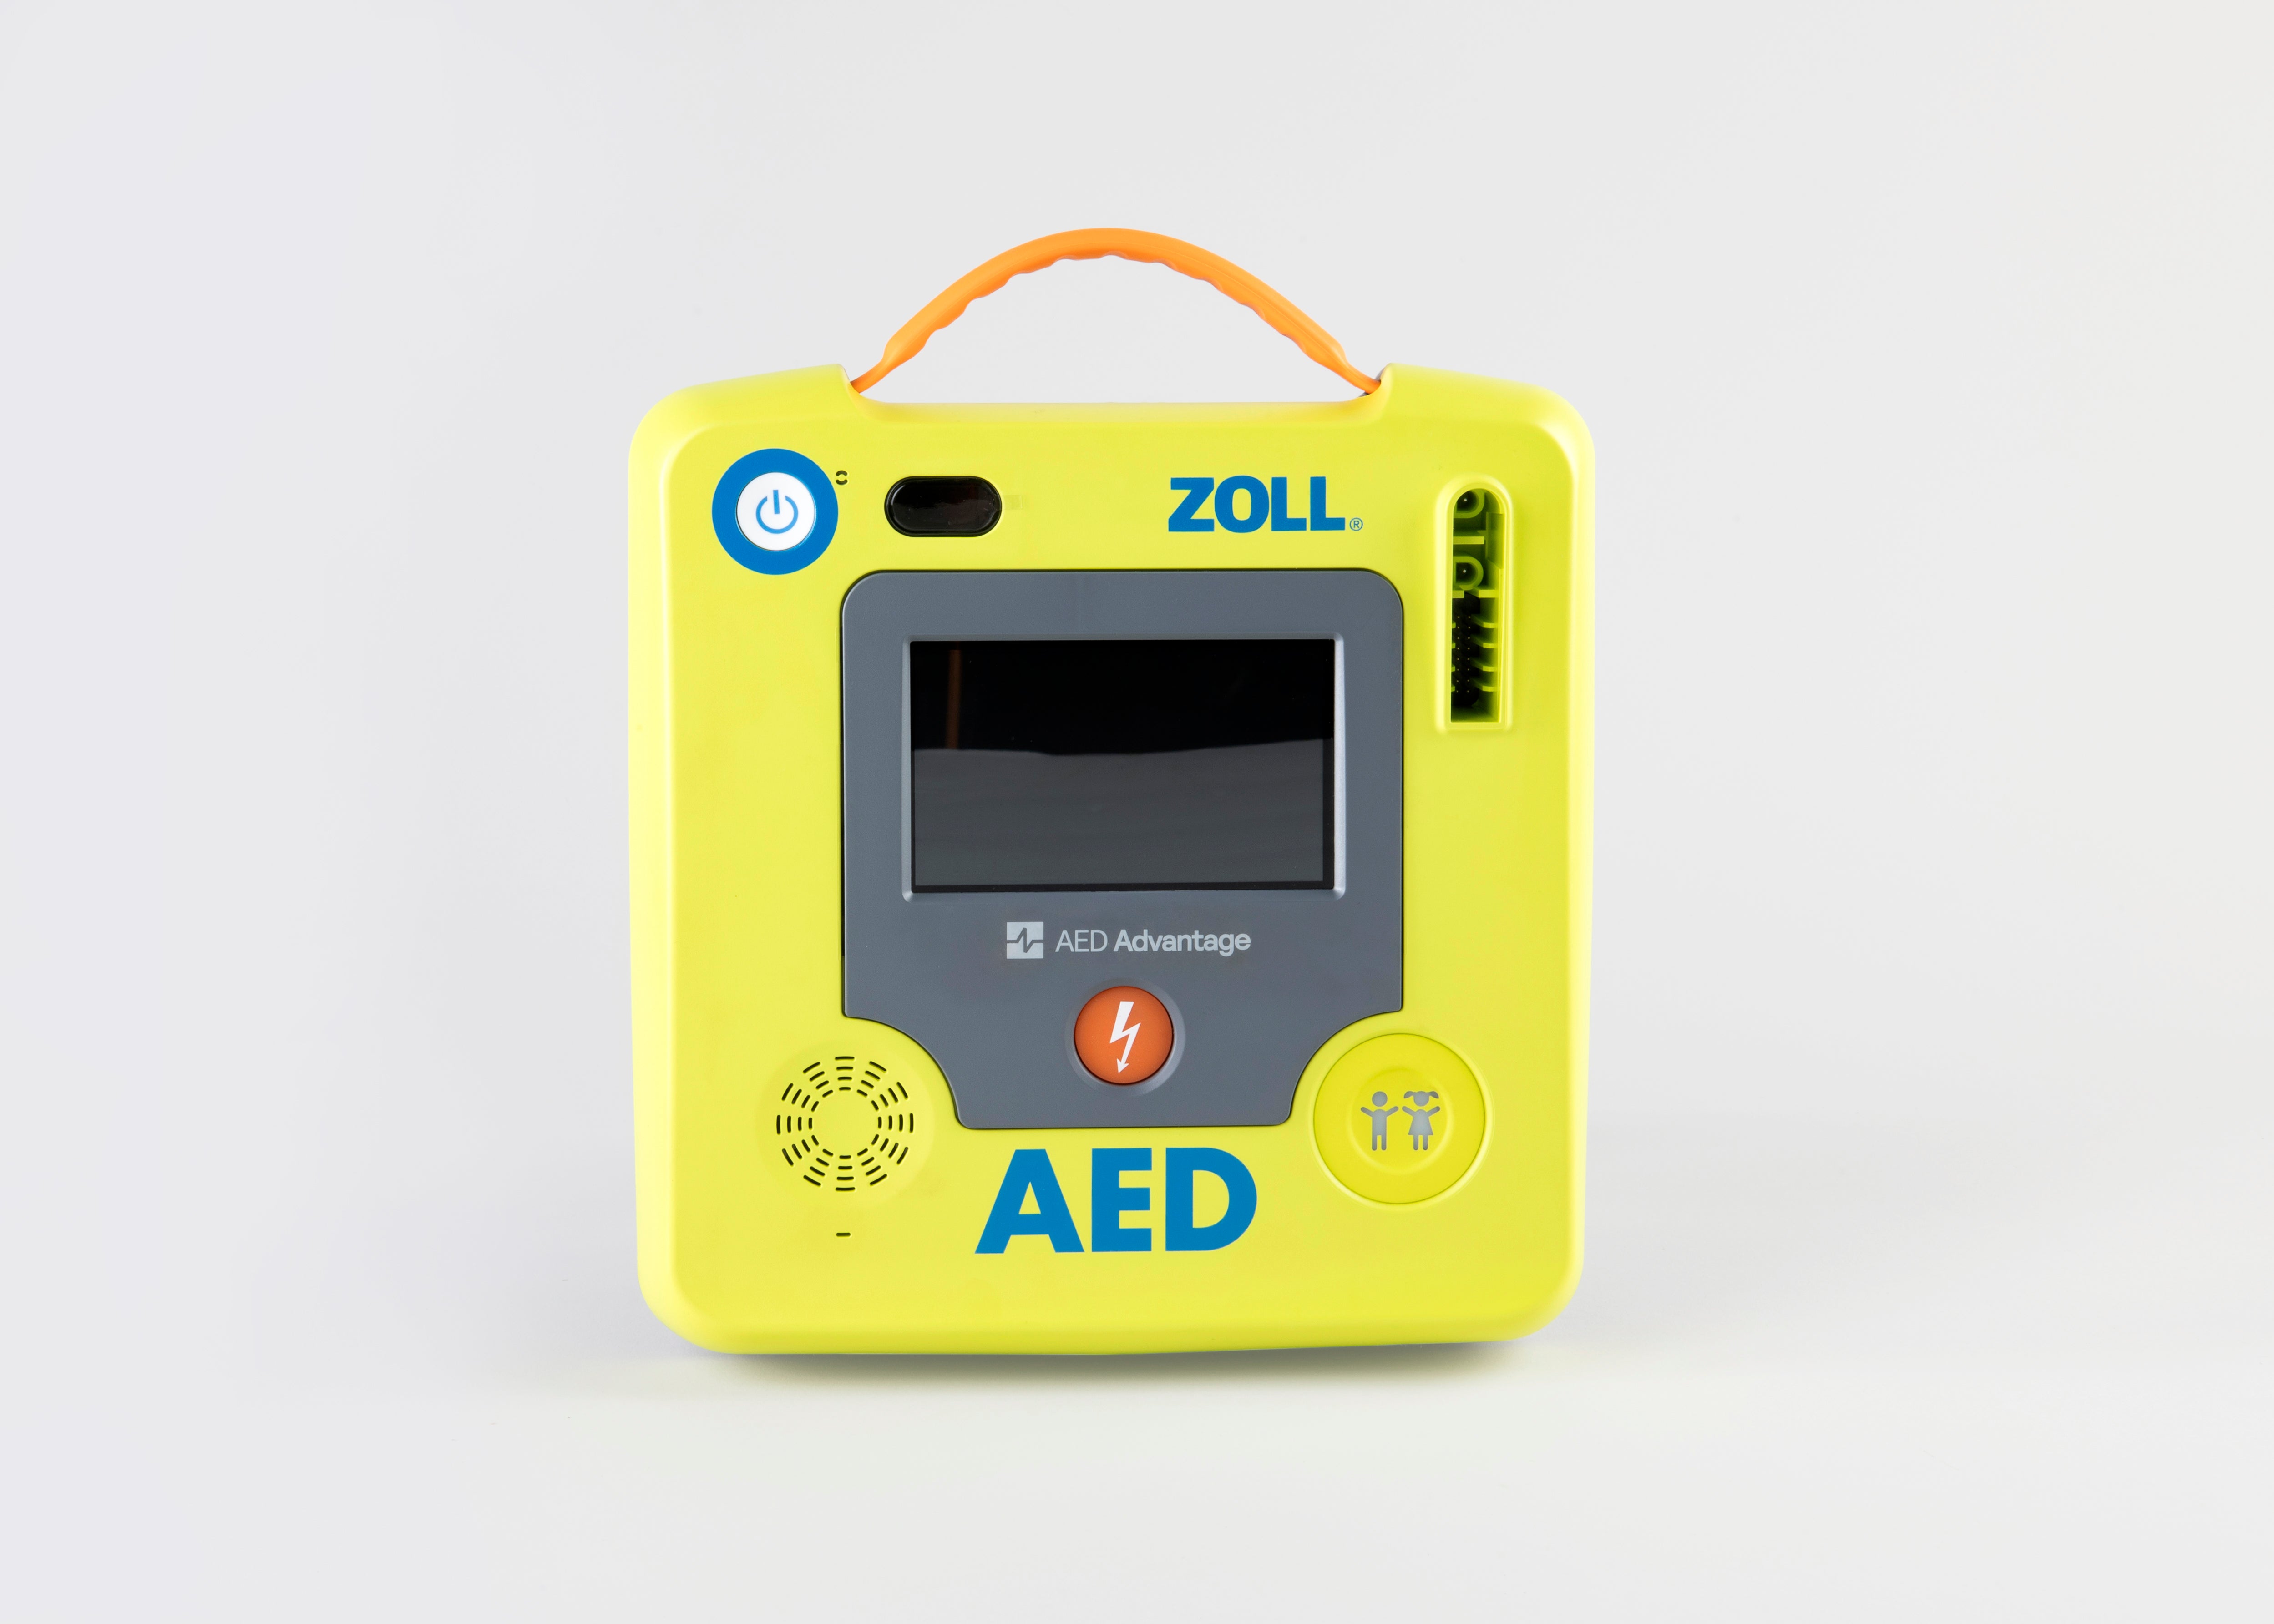 A green automated external defibrillator with a screen and orange carry handle